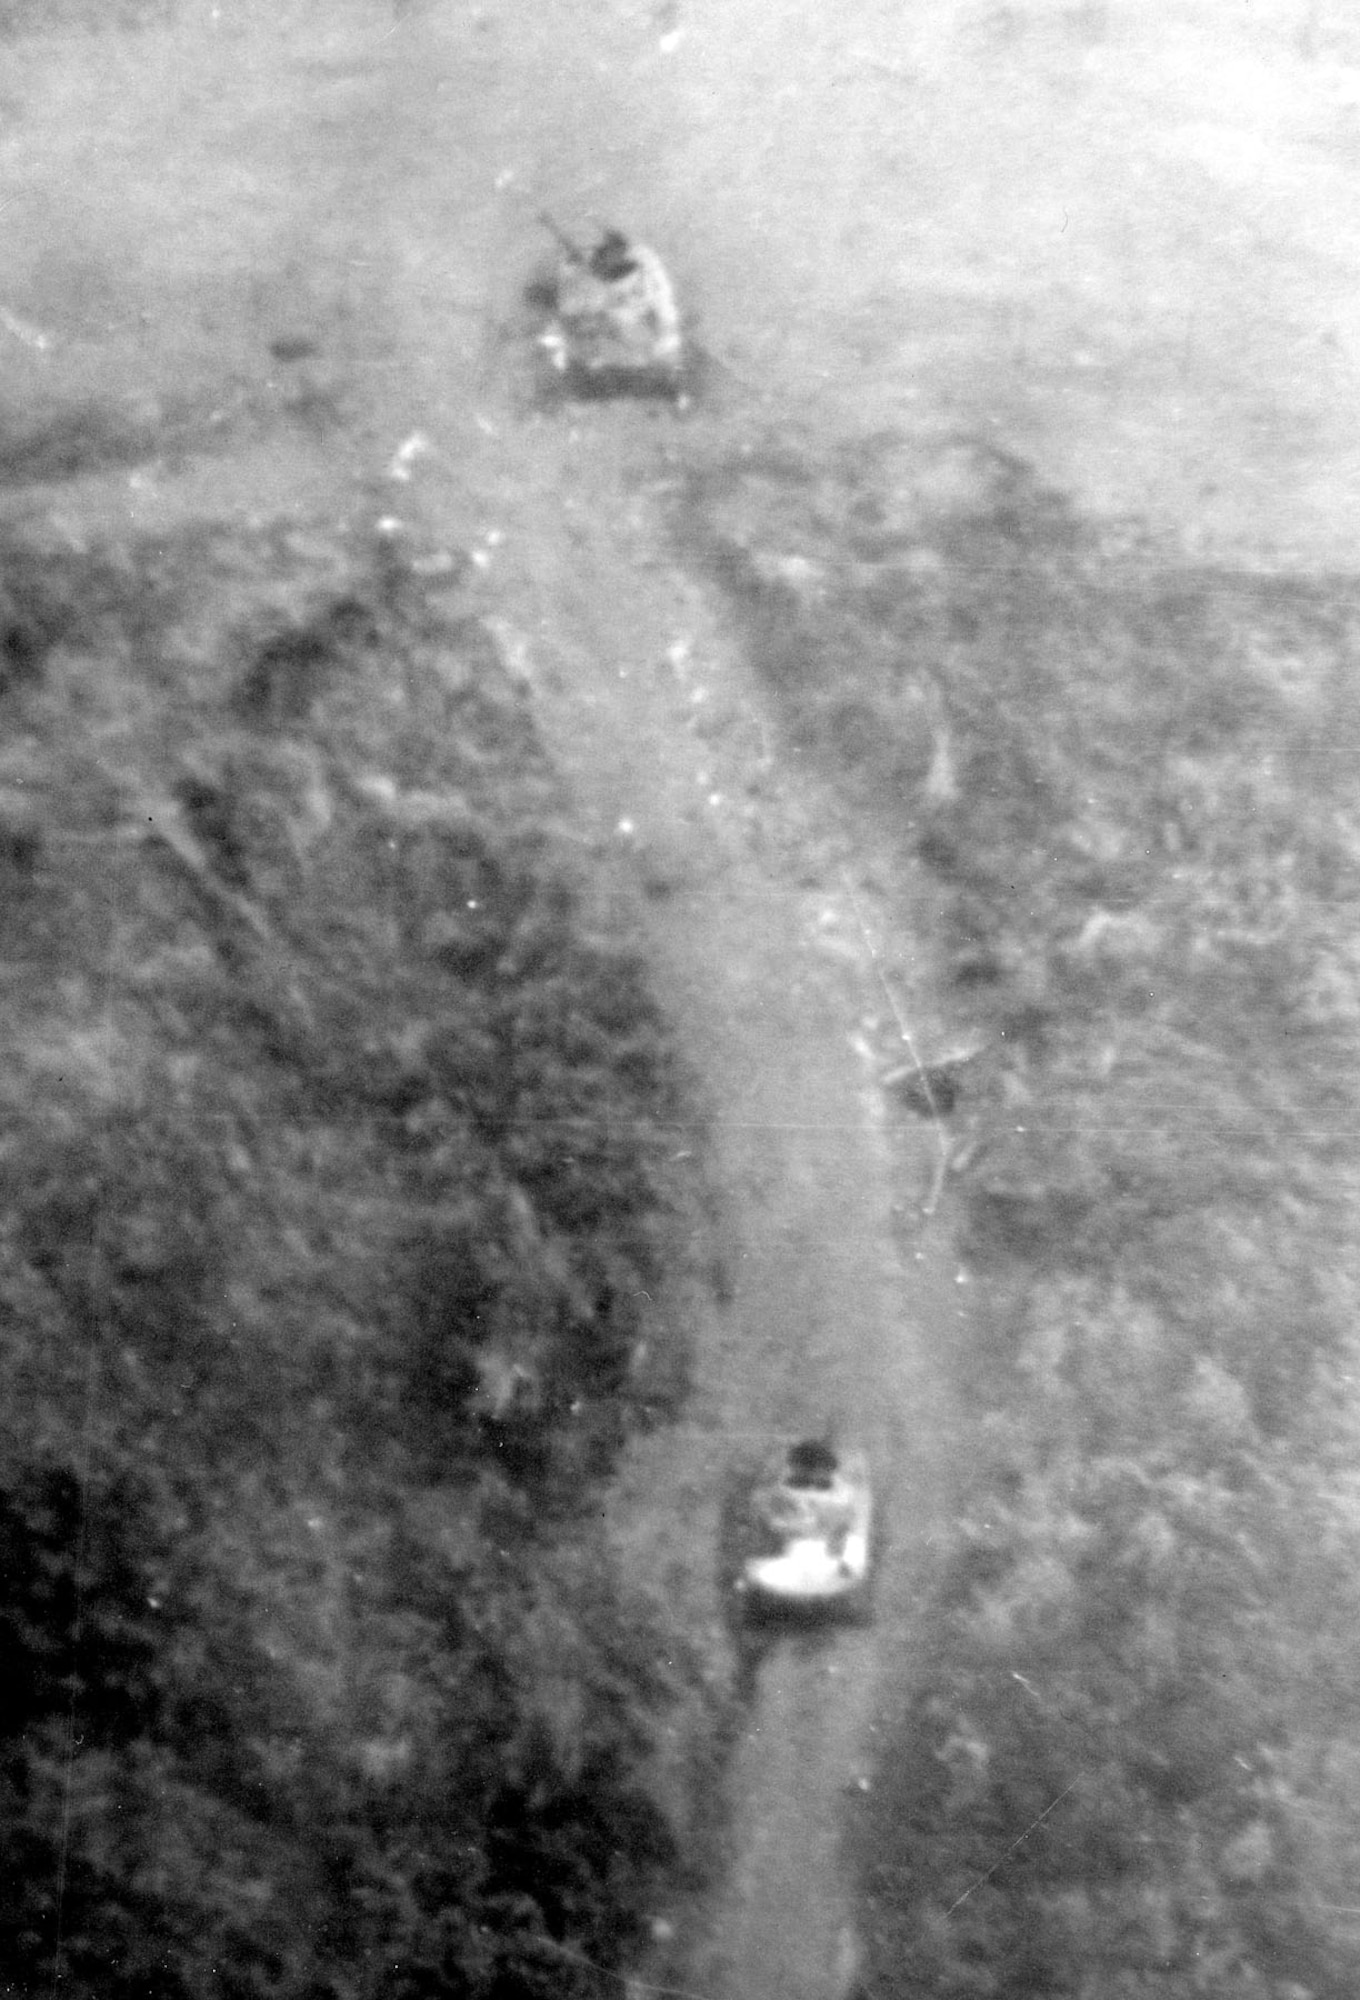 When North Vietnamese Army forces attacked the Special Operations outpost at Lang Vei, near Khe Sanh, in February 1968, FACs assisted the defenders by directing air strikes. In addition, they provided valuable intelligence information. This photograph of two PT-76 tanks disabled on the road leading into Lang Vei proved that the communists were using armored vehicles in South Vietnam. (U.S. Air Force photo)